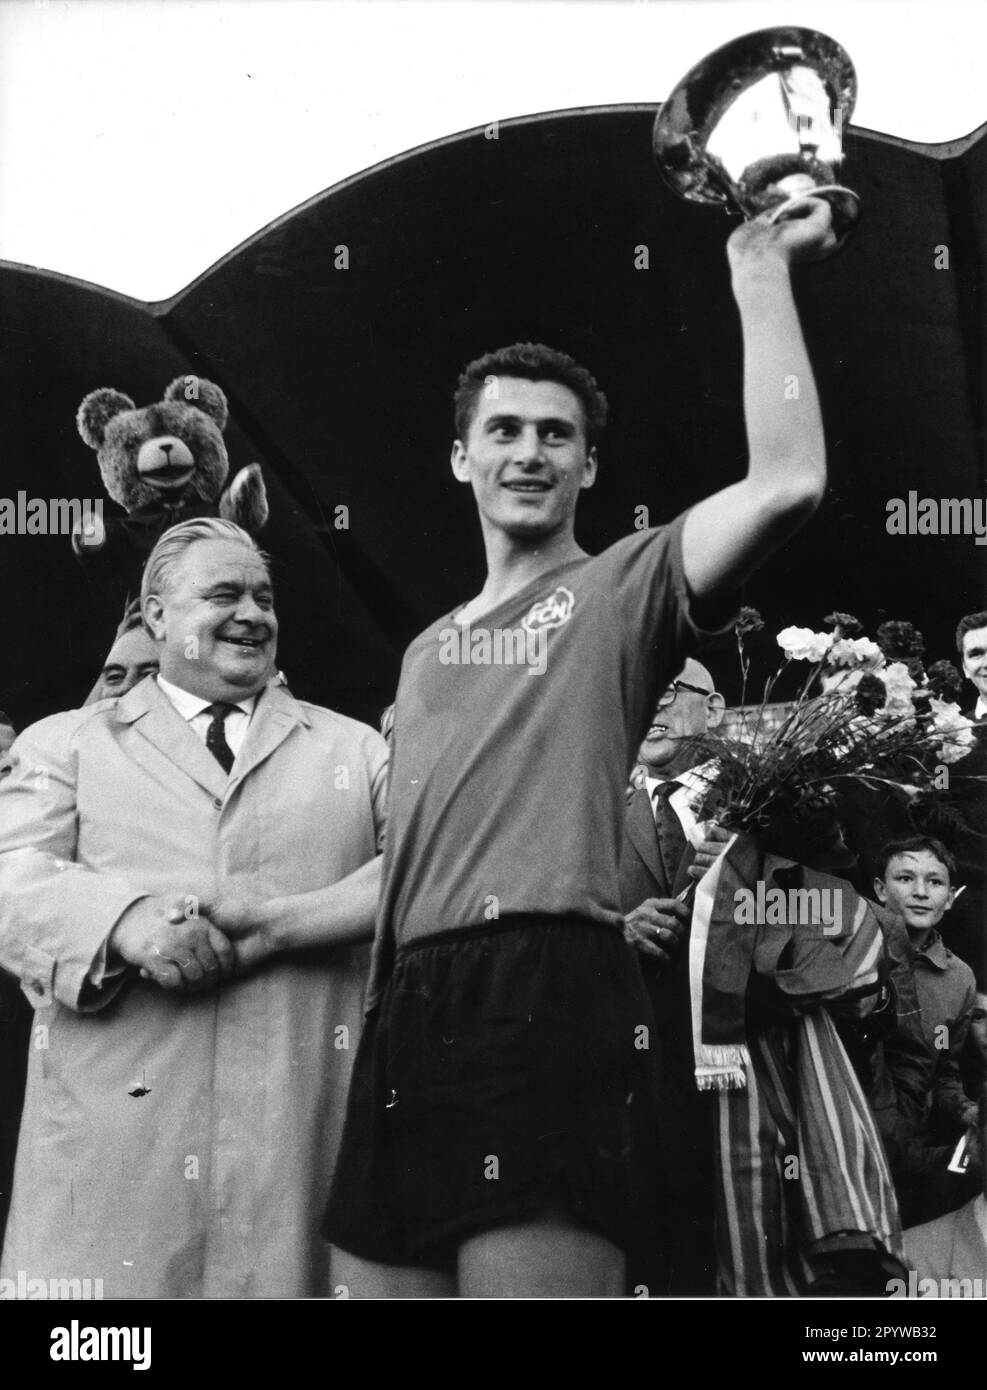 DFB Cup Final 29.08.1962 in Hannover. 1st FC Nuremberg - Fortuna Dusseldorf 2:1 n.V. Team captain Ferdinand Wenauer (FCN) presents the cup. For journalistic use only! Only for editorial use! [automated translation] Stock Photo